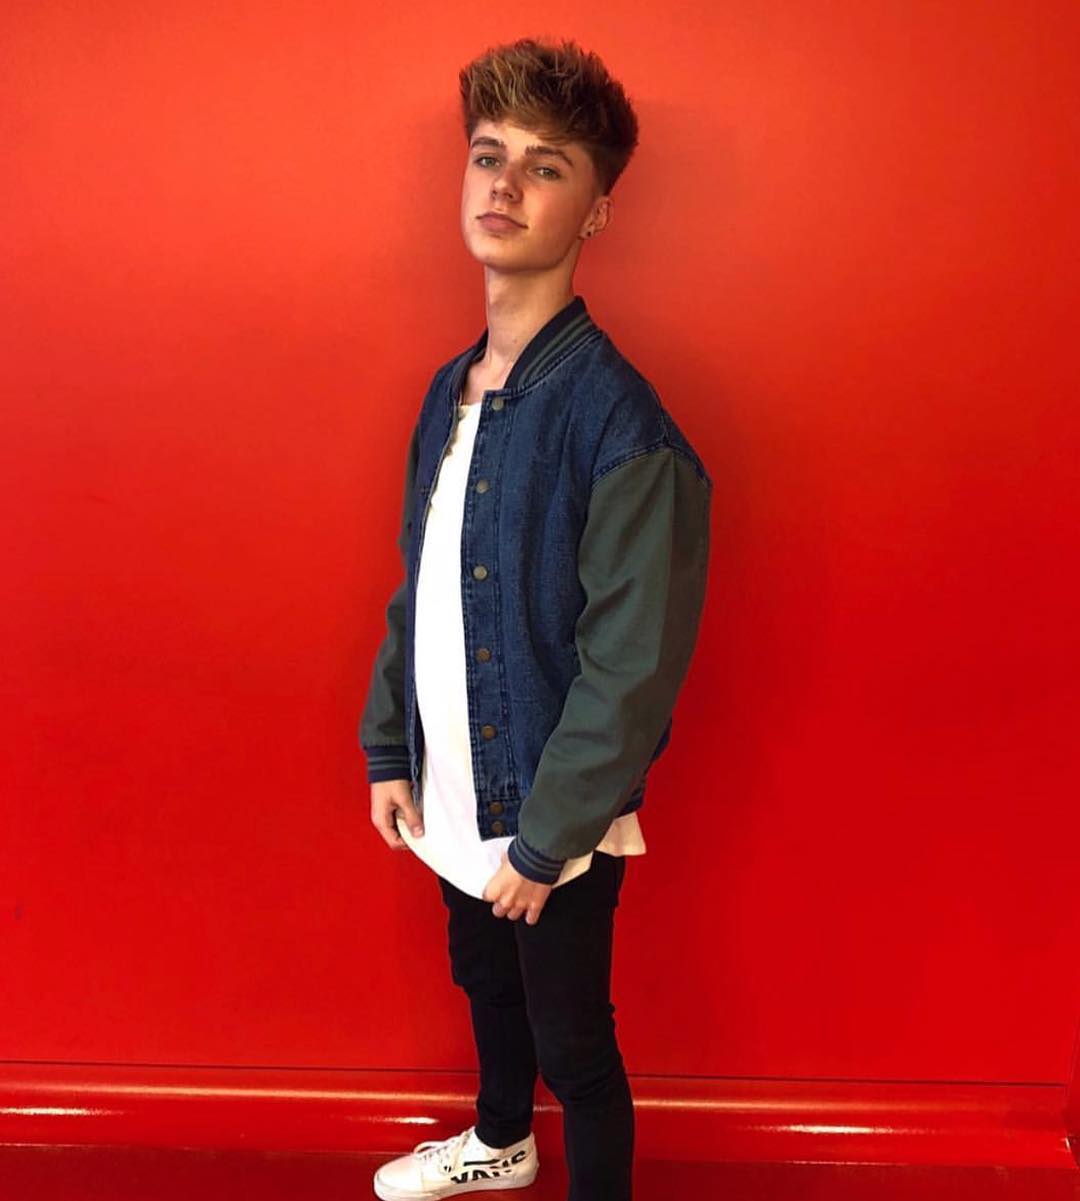 HRVY Harvey Leigh Cantwell Wallpapers - Wallpaper Cave